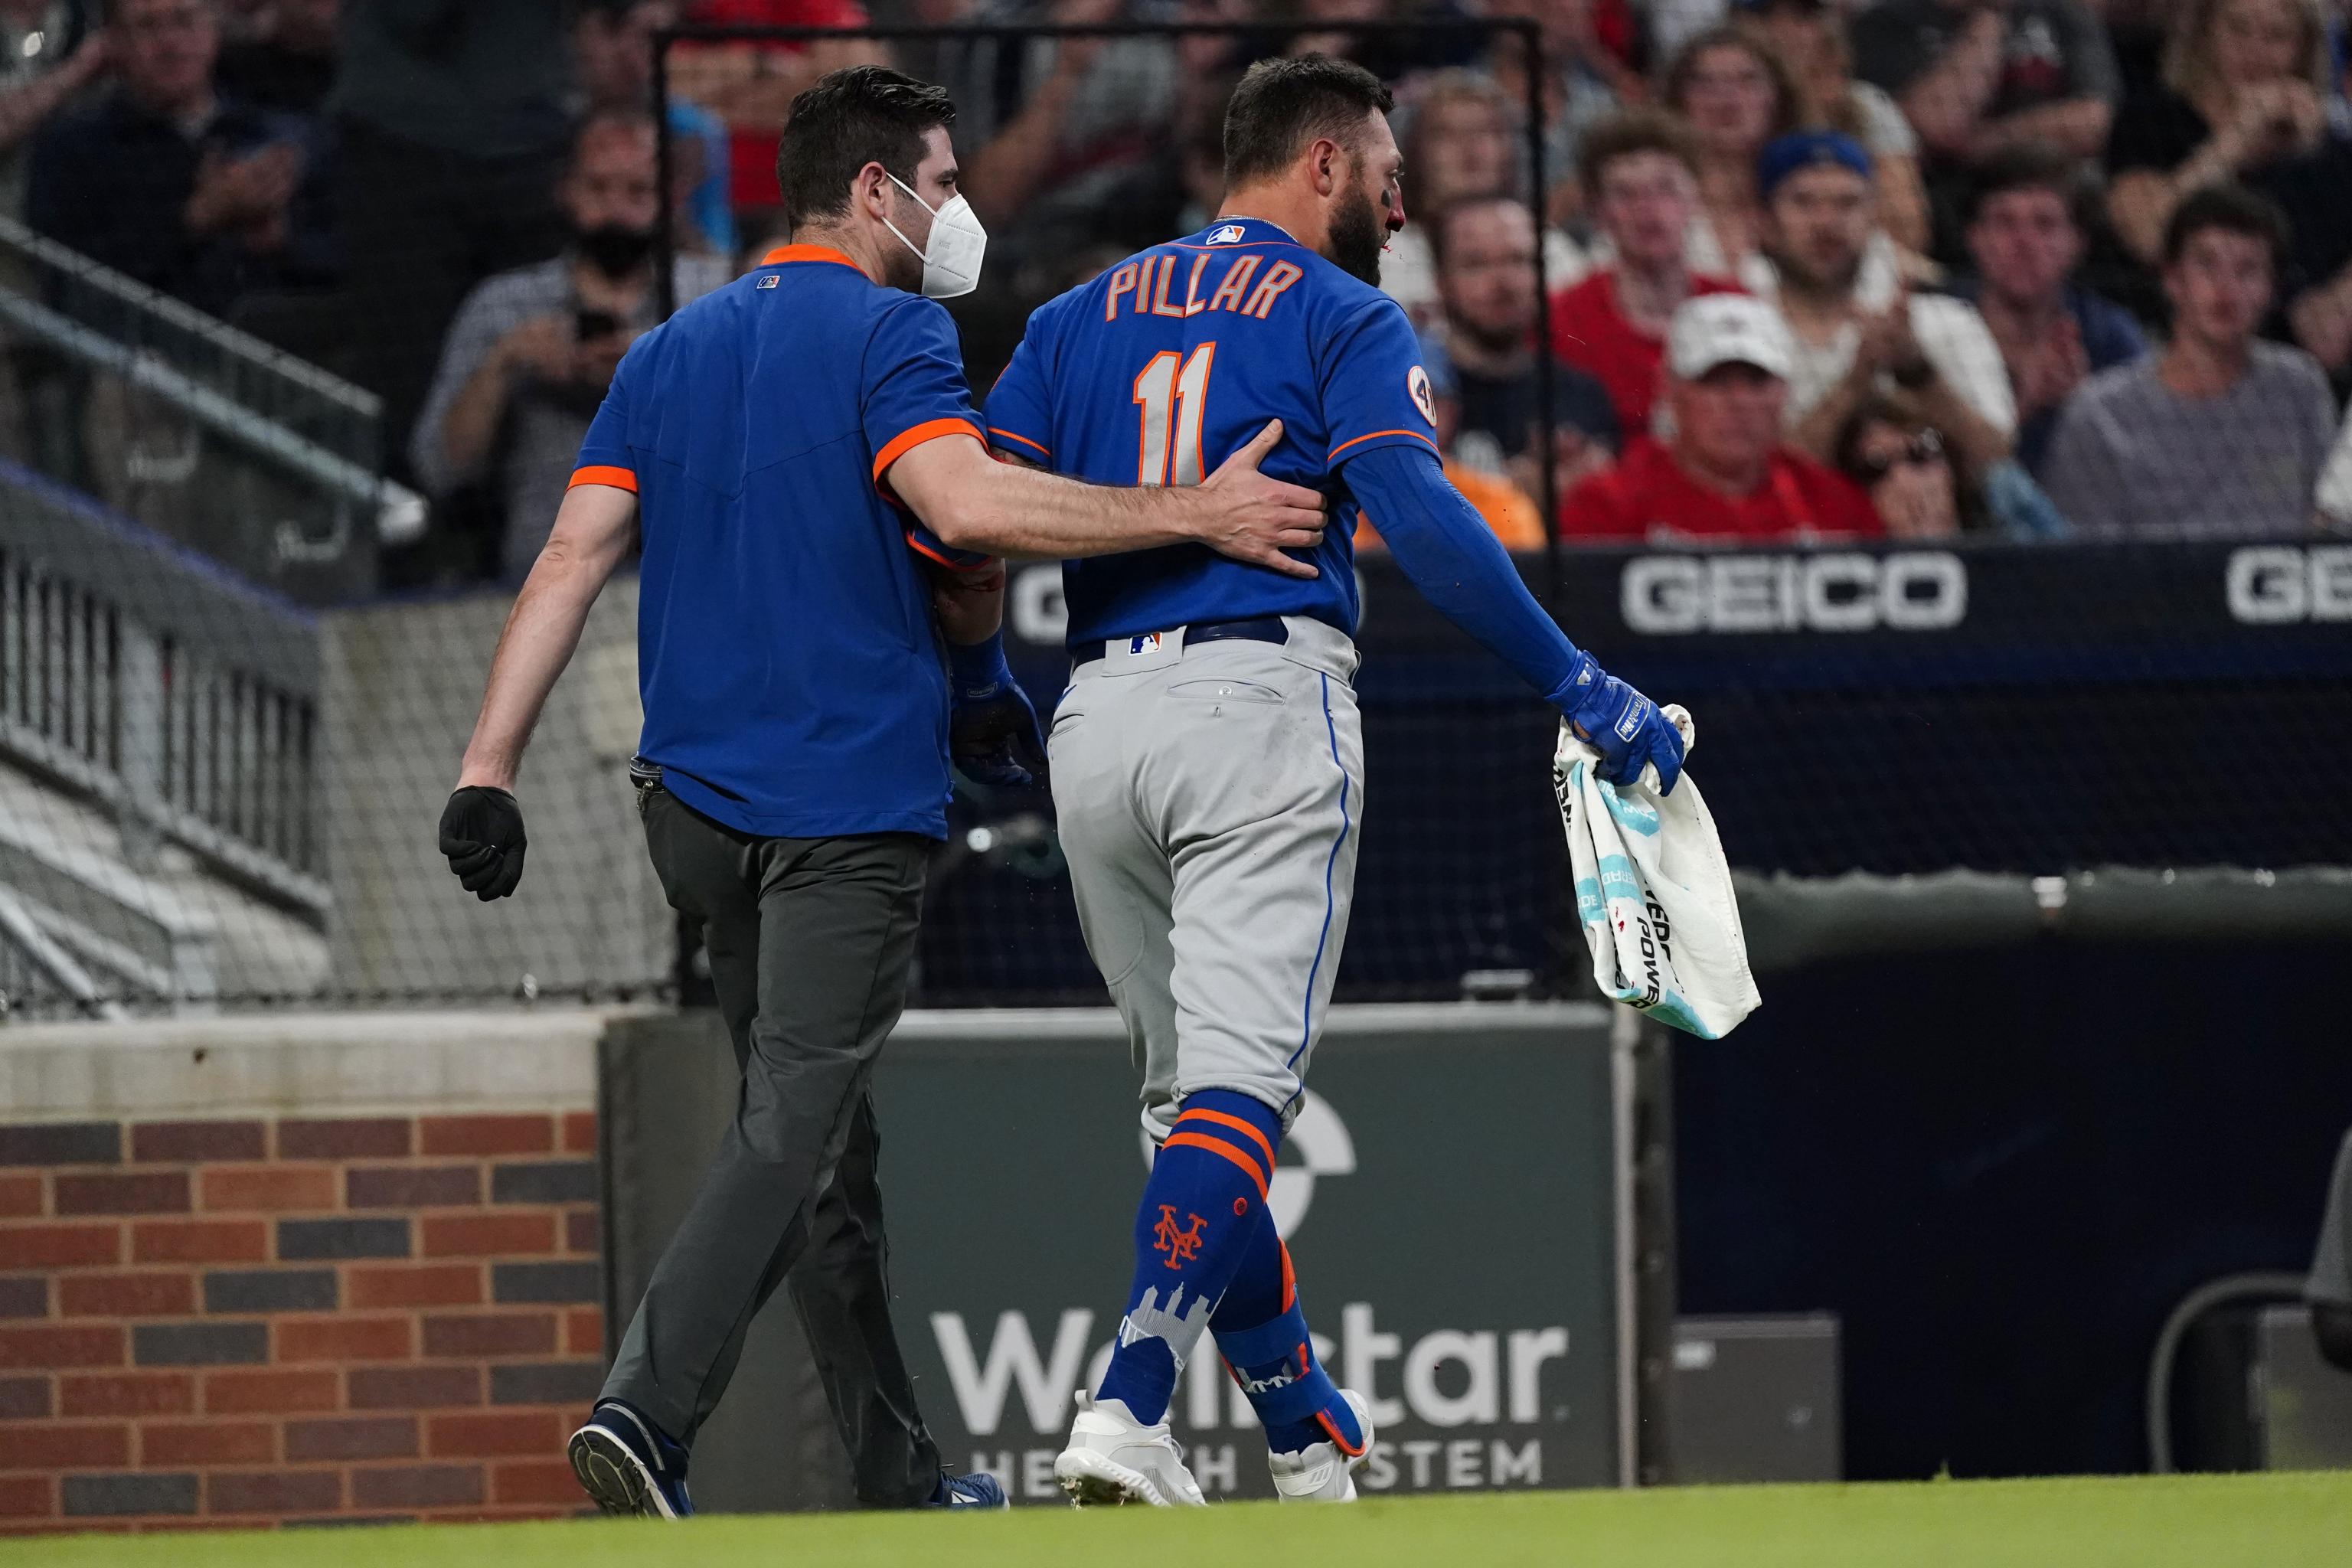 Mets' Kevin Pillar Suffered Broken Nose Injury After Taking Pitch to Face, News, Scores, Highlights, Stats, and Rumors